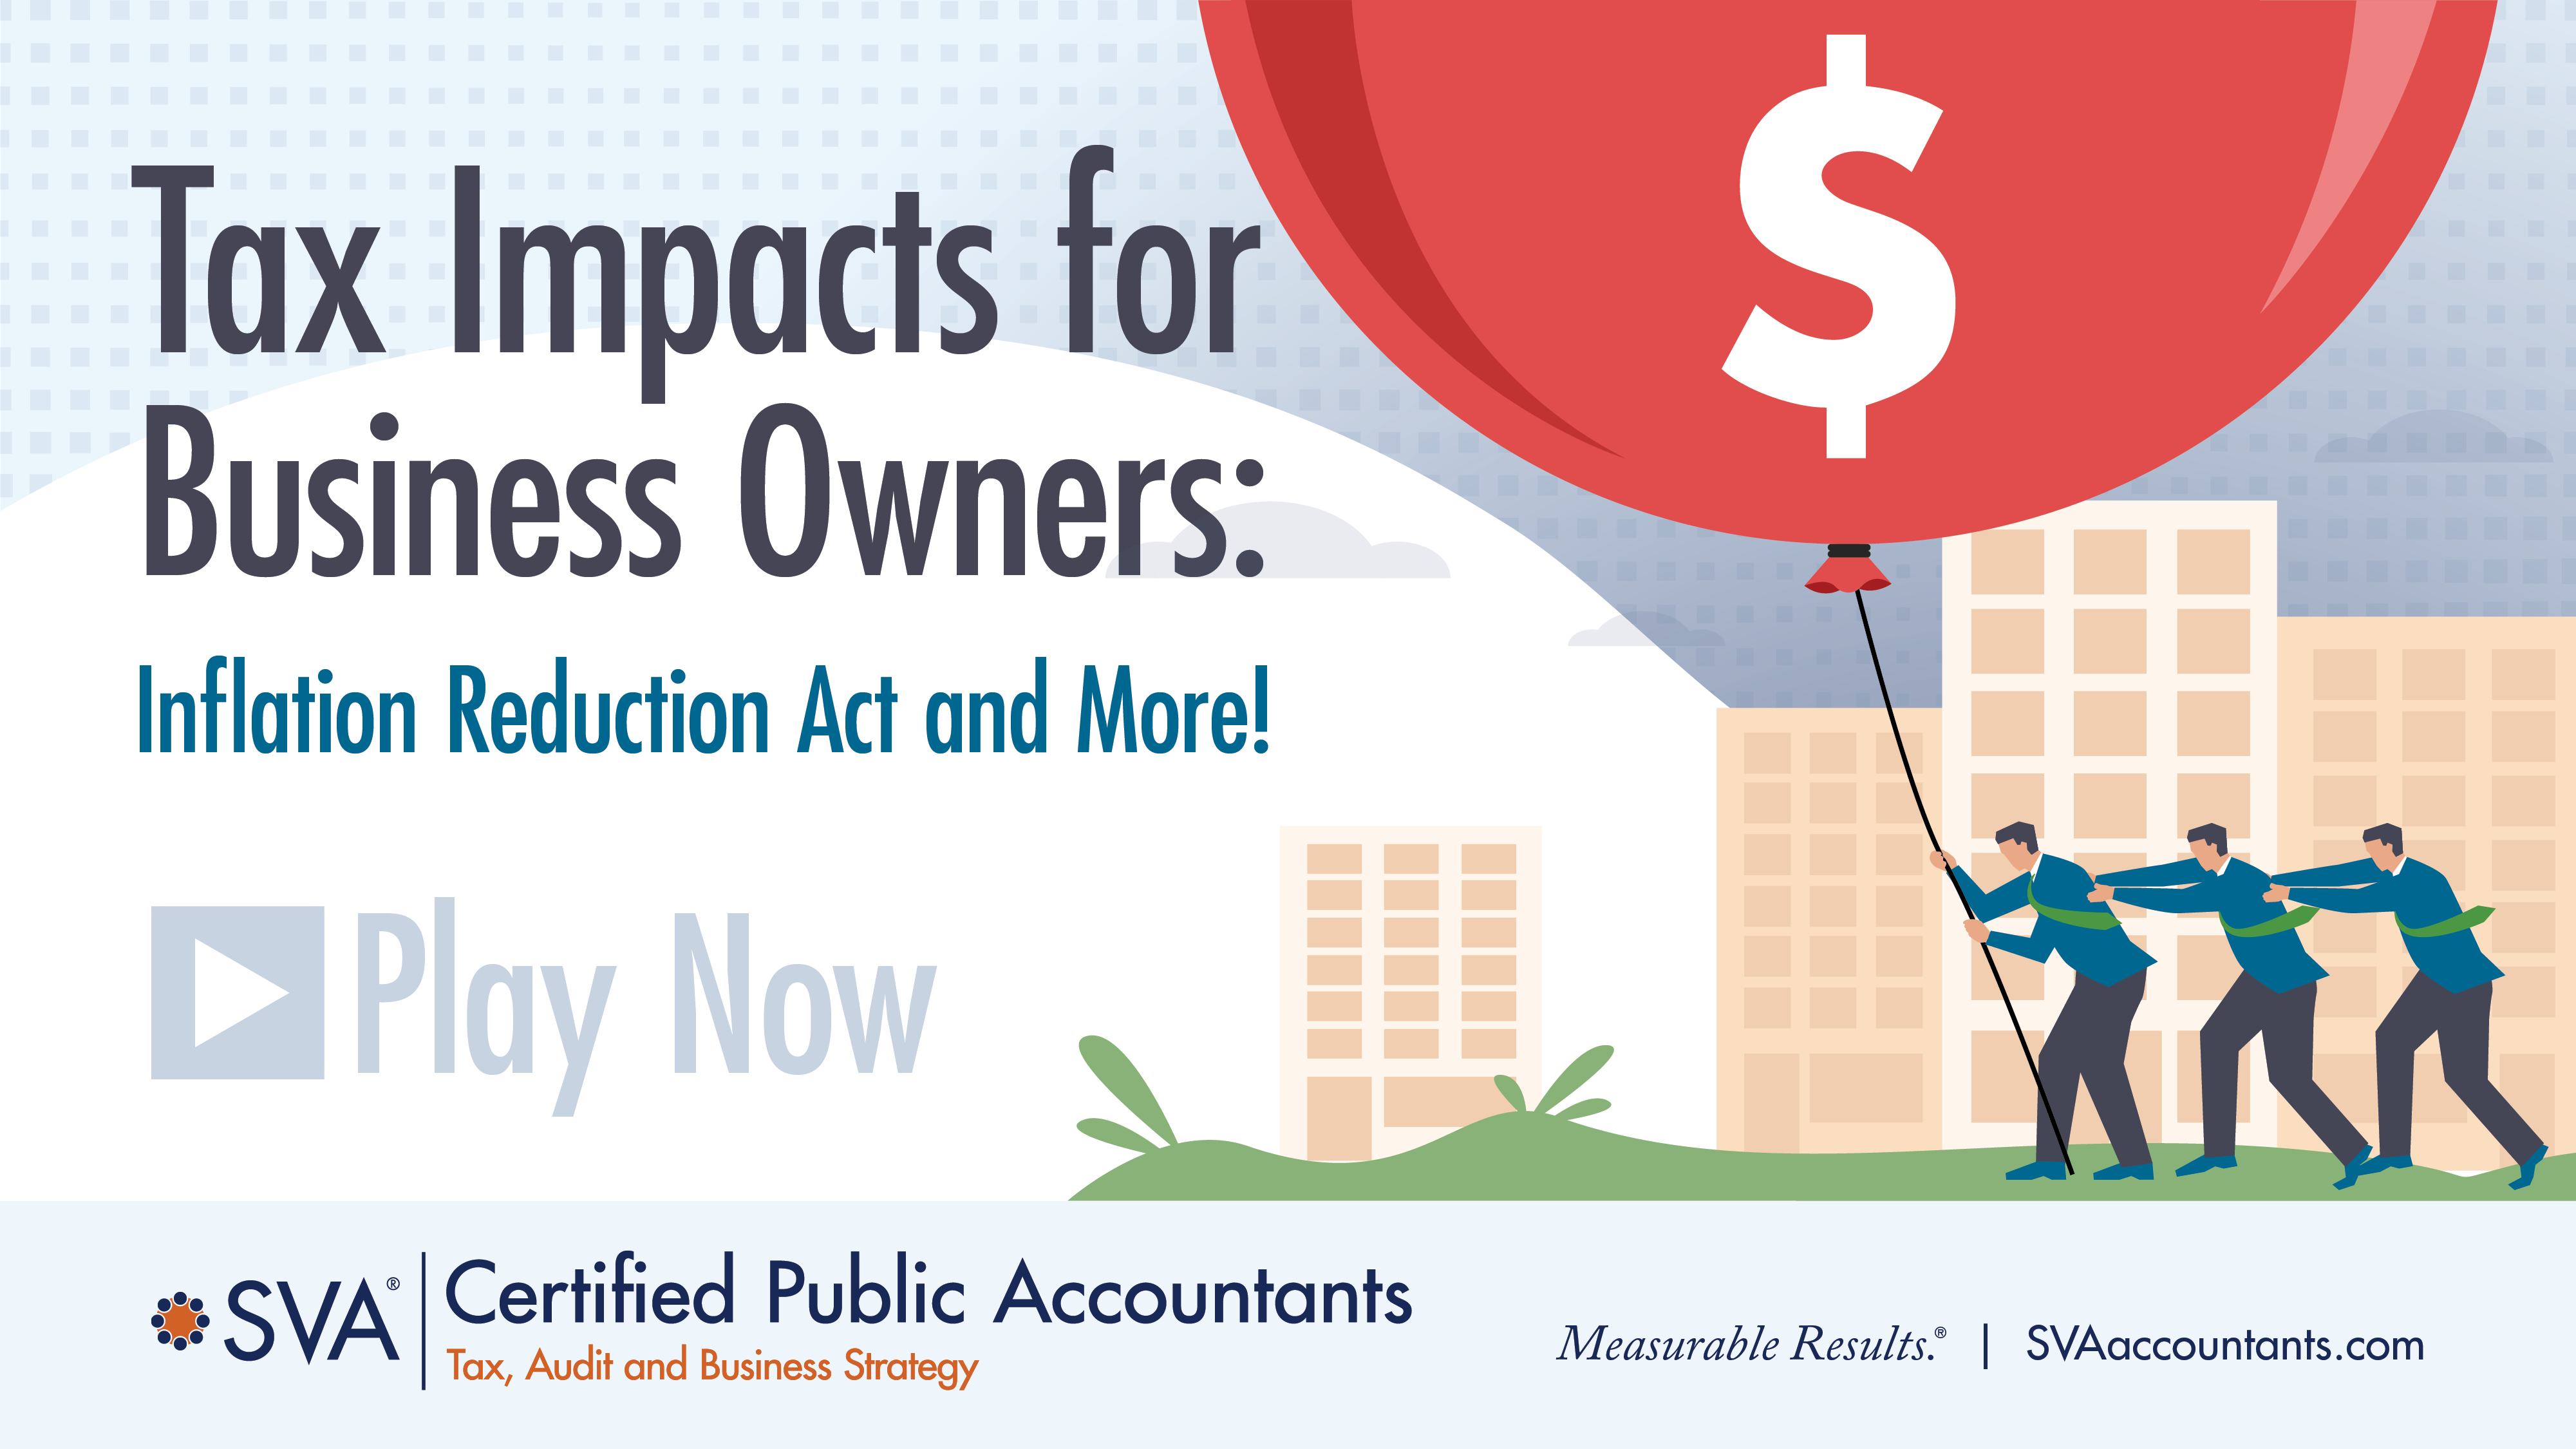 Tax Impacts for Business Owners: Inflation Reduction Act and More!